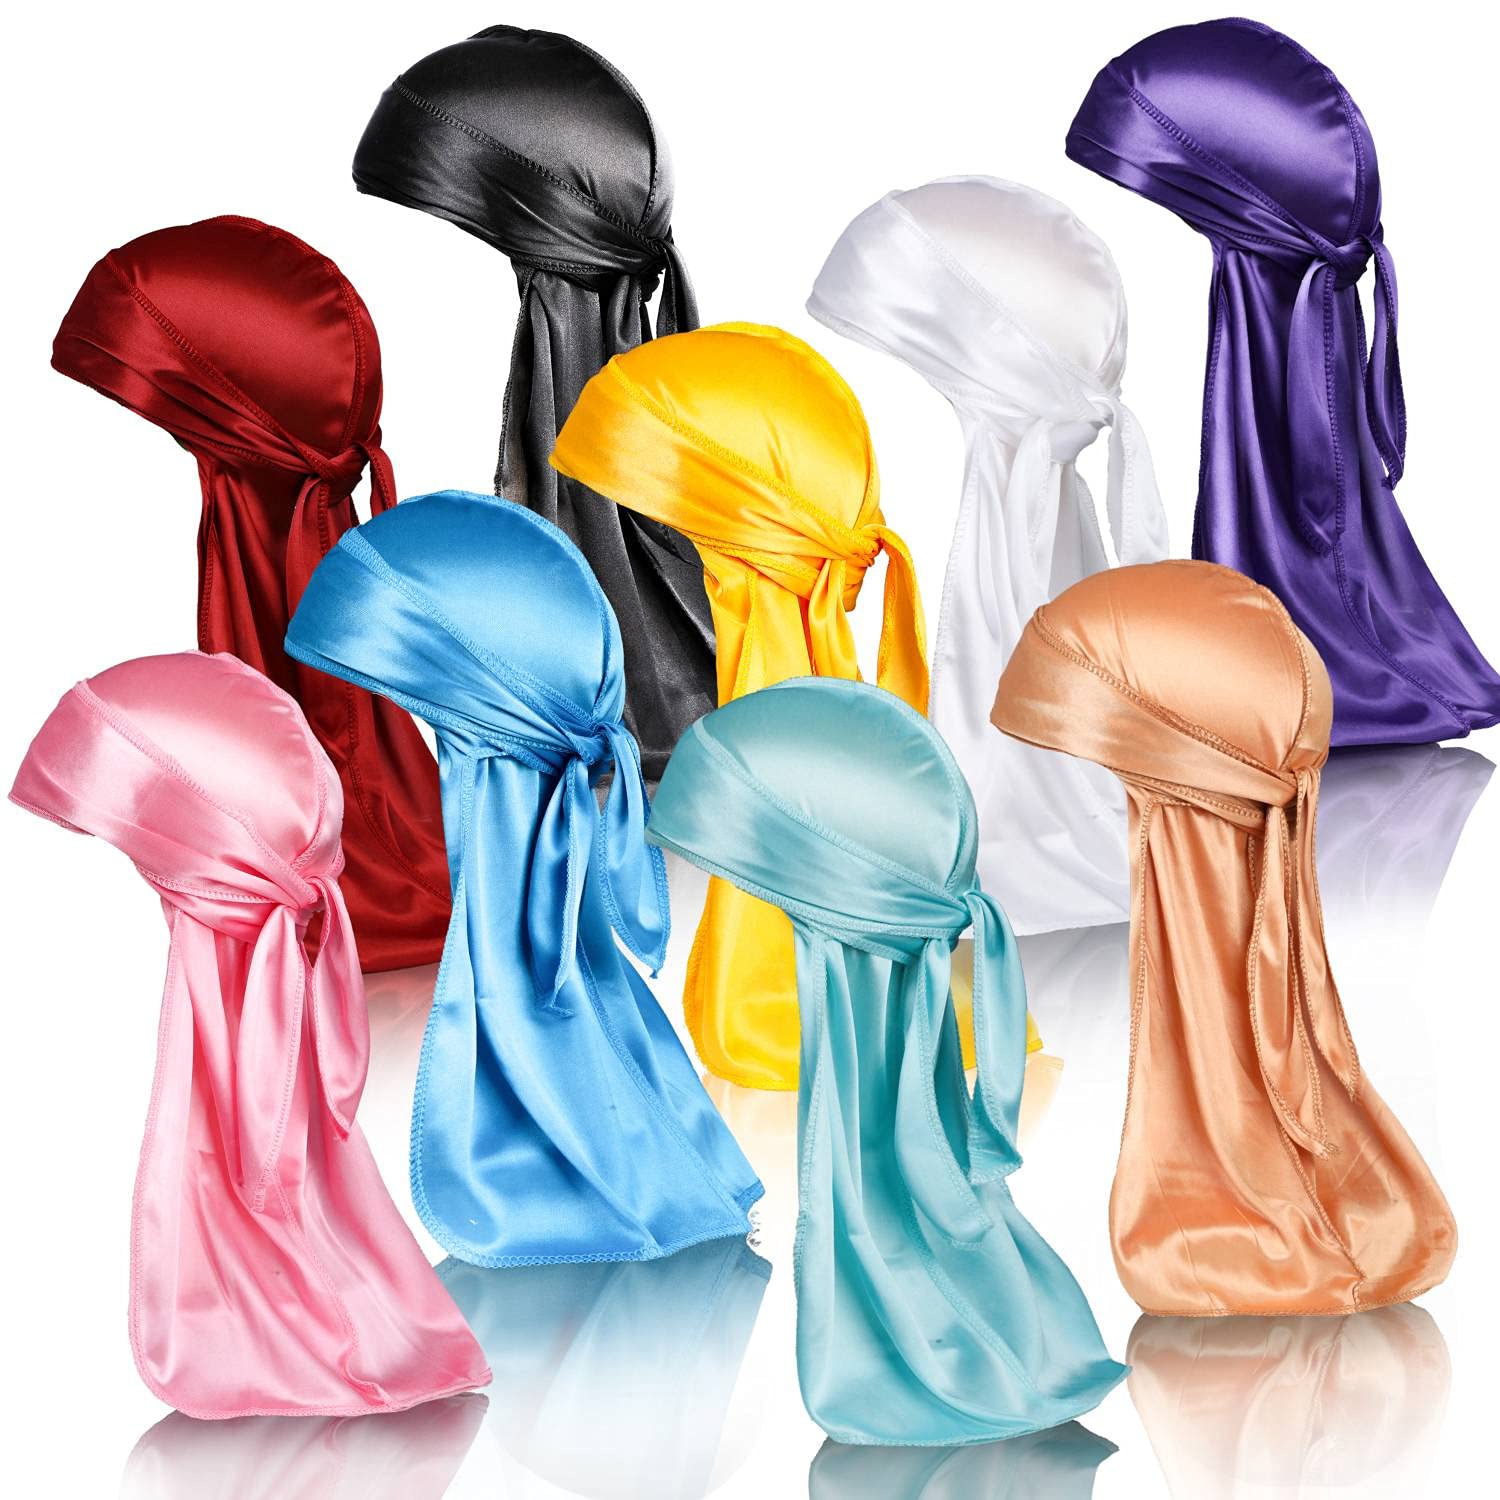 YEZEY 8Pcs Silk Durag Pack, Silky Durags for Men Women Waves, Satin Durag  with Extra Long Tails, Breathable Doo Rags with Wide Straps Black, White,  Red, Blue, Pink, Purple, Yellow, Green